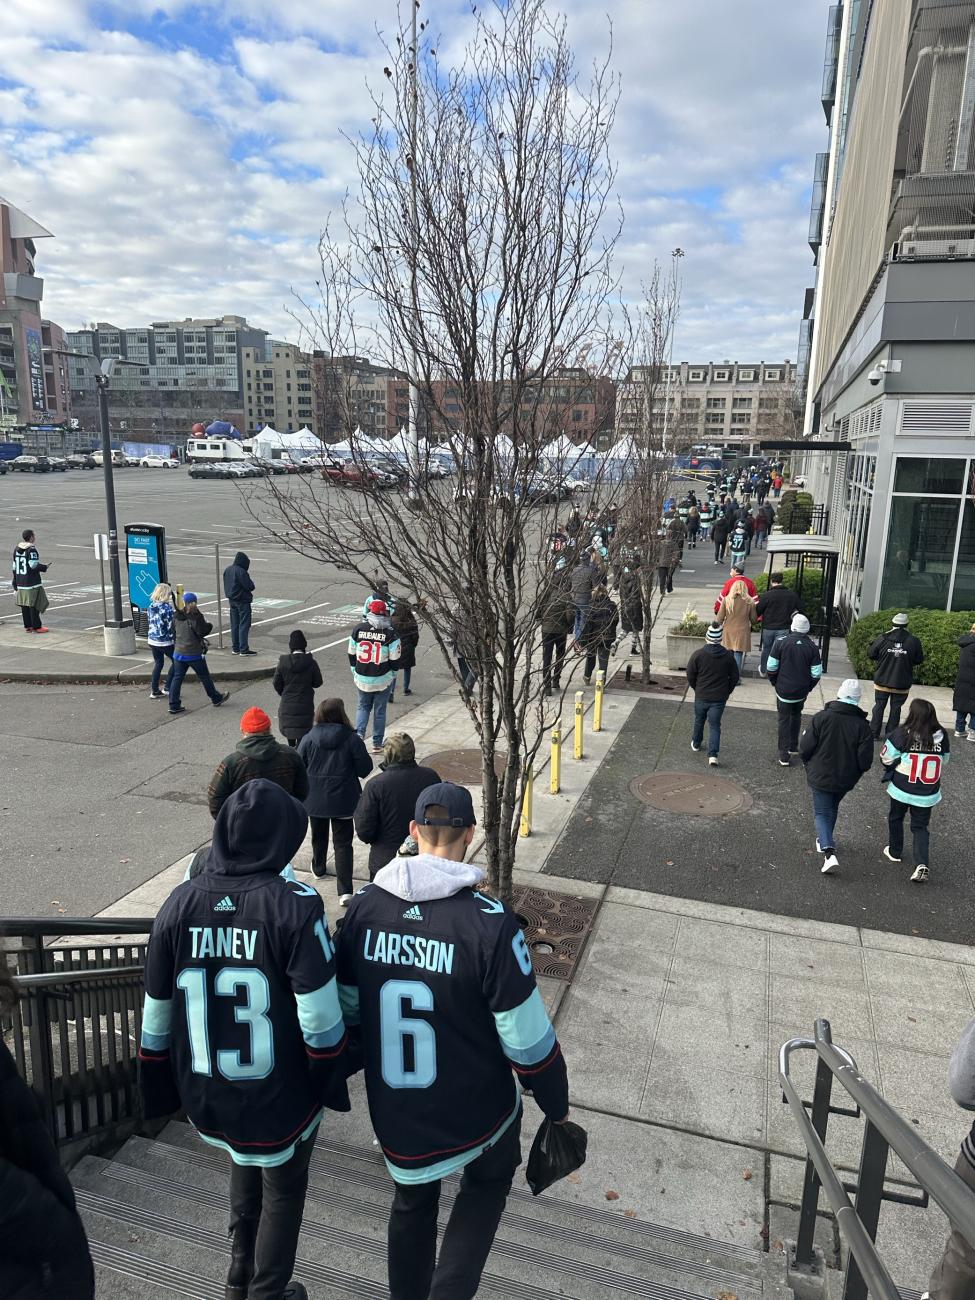 Fans in a Tanev and Larsson jersey walk to the stadium.